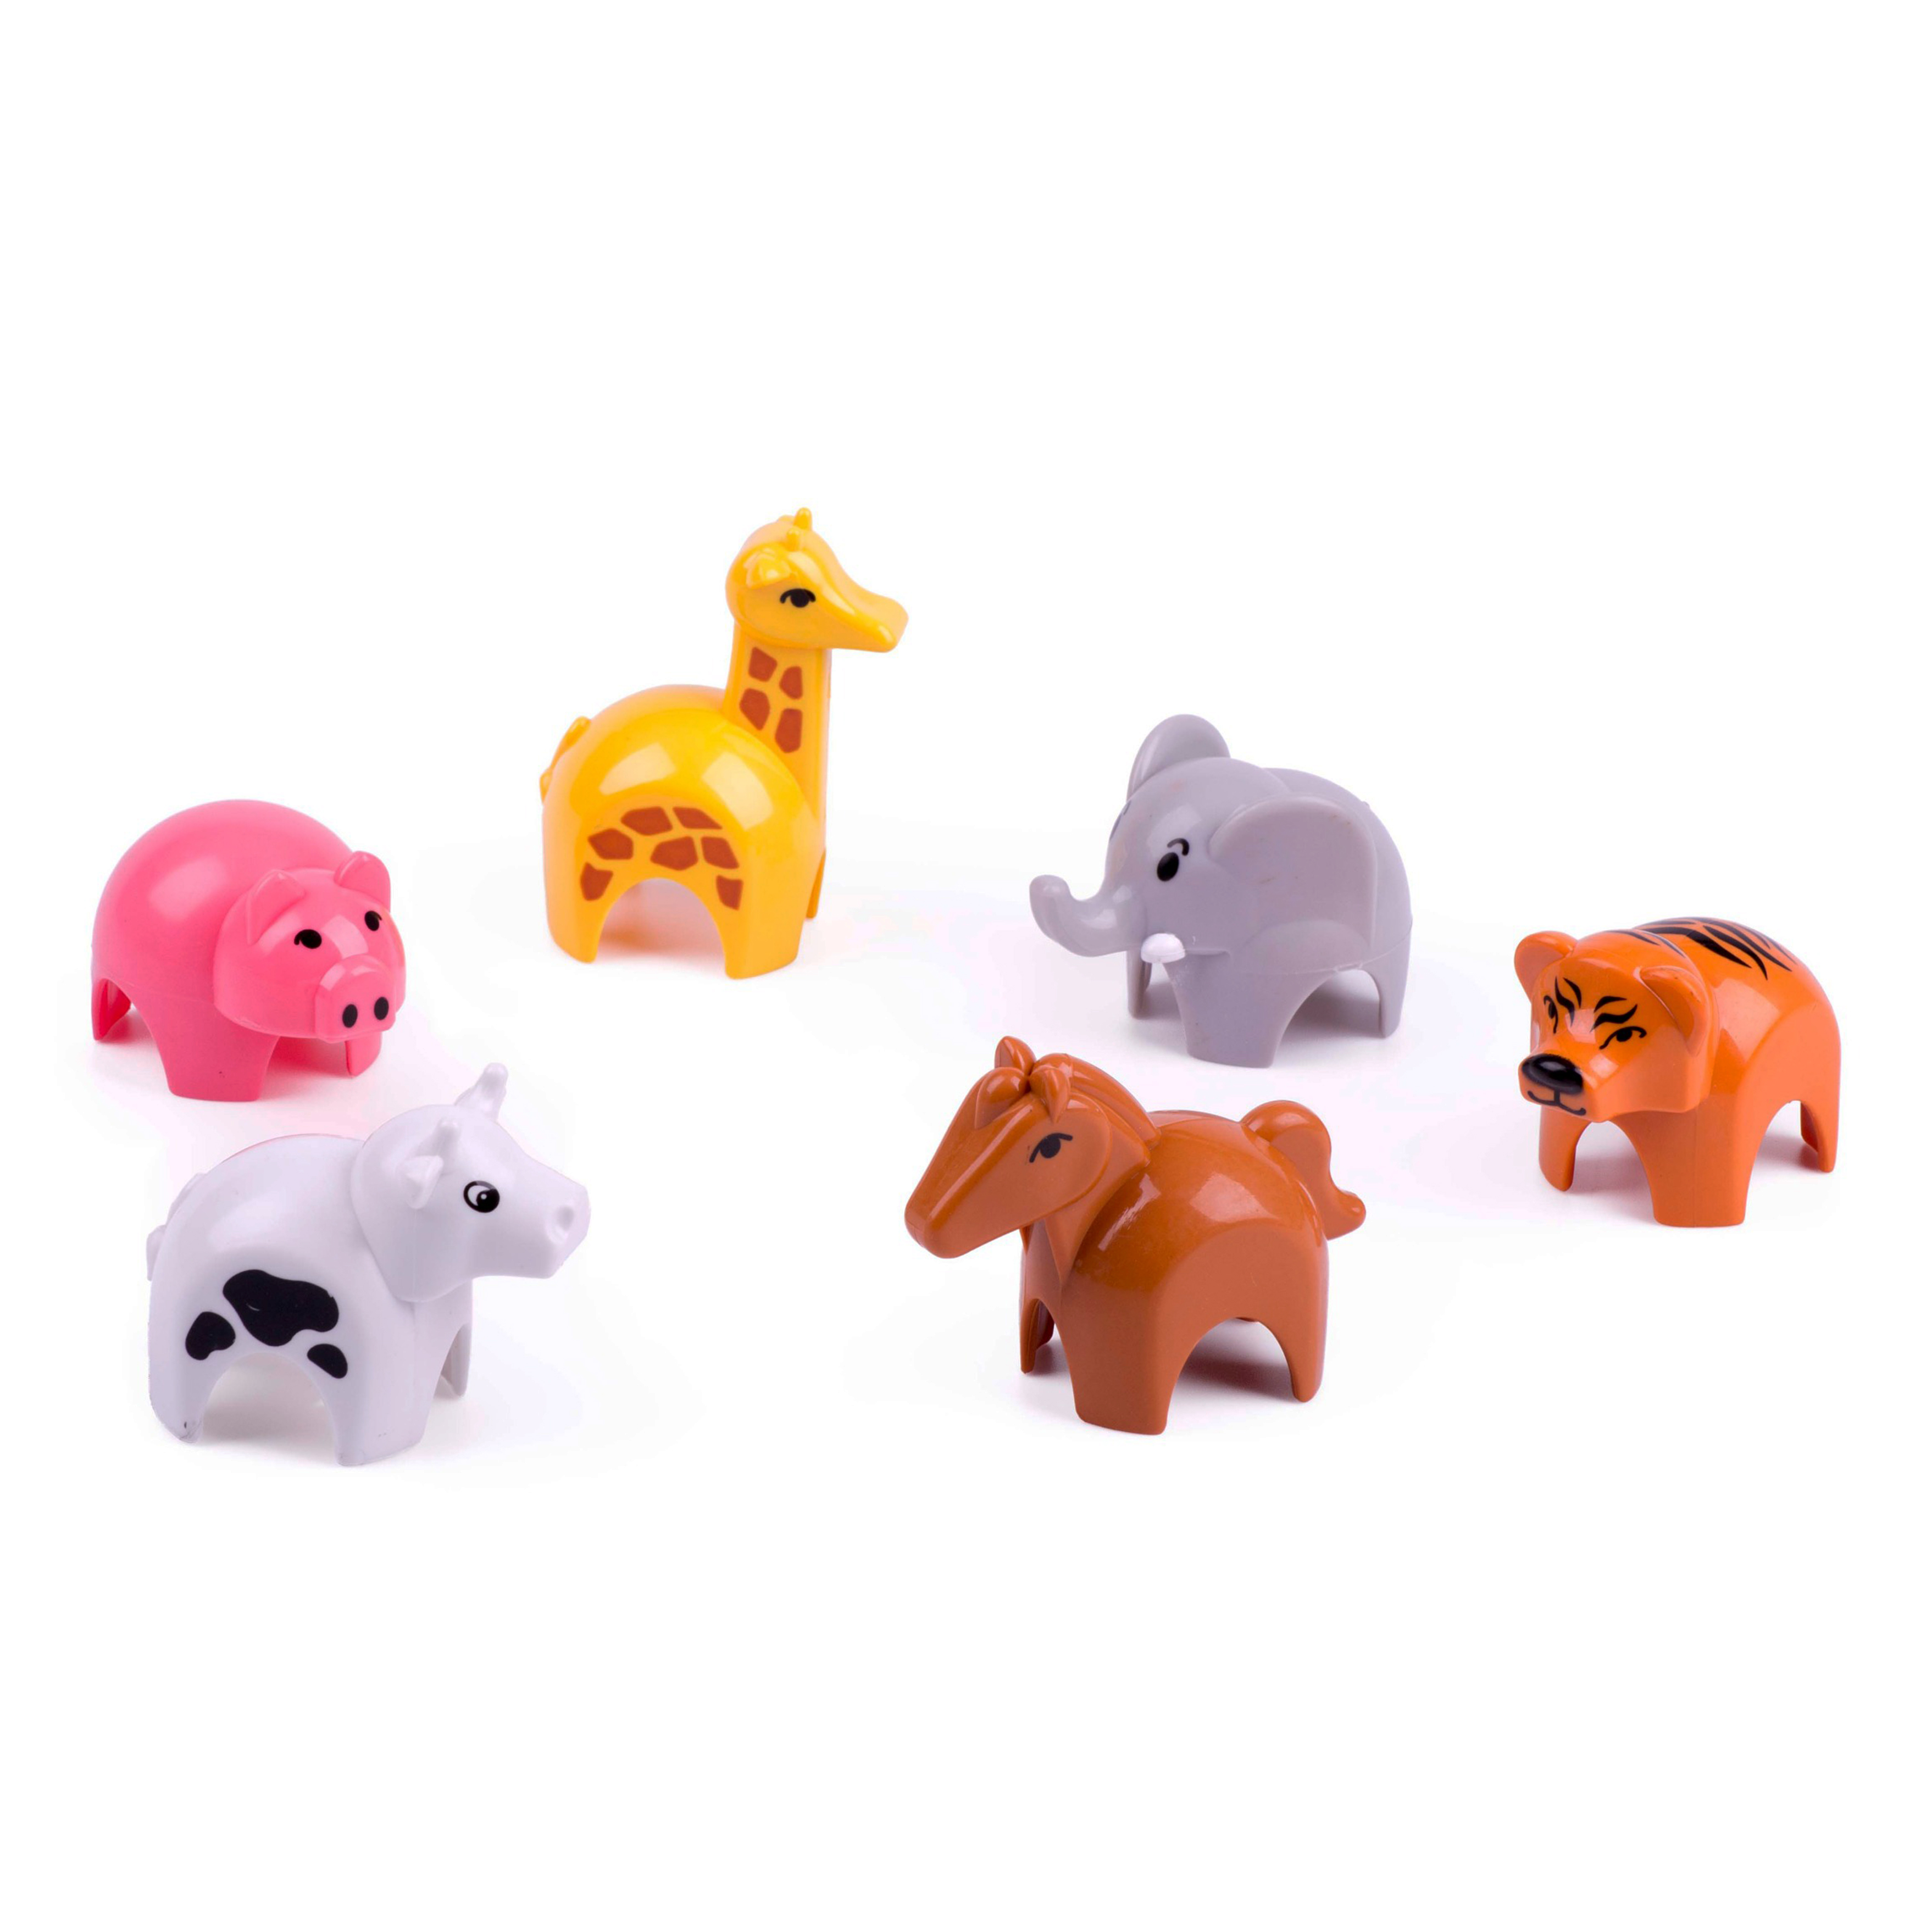 Animals in clear box